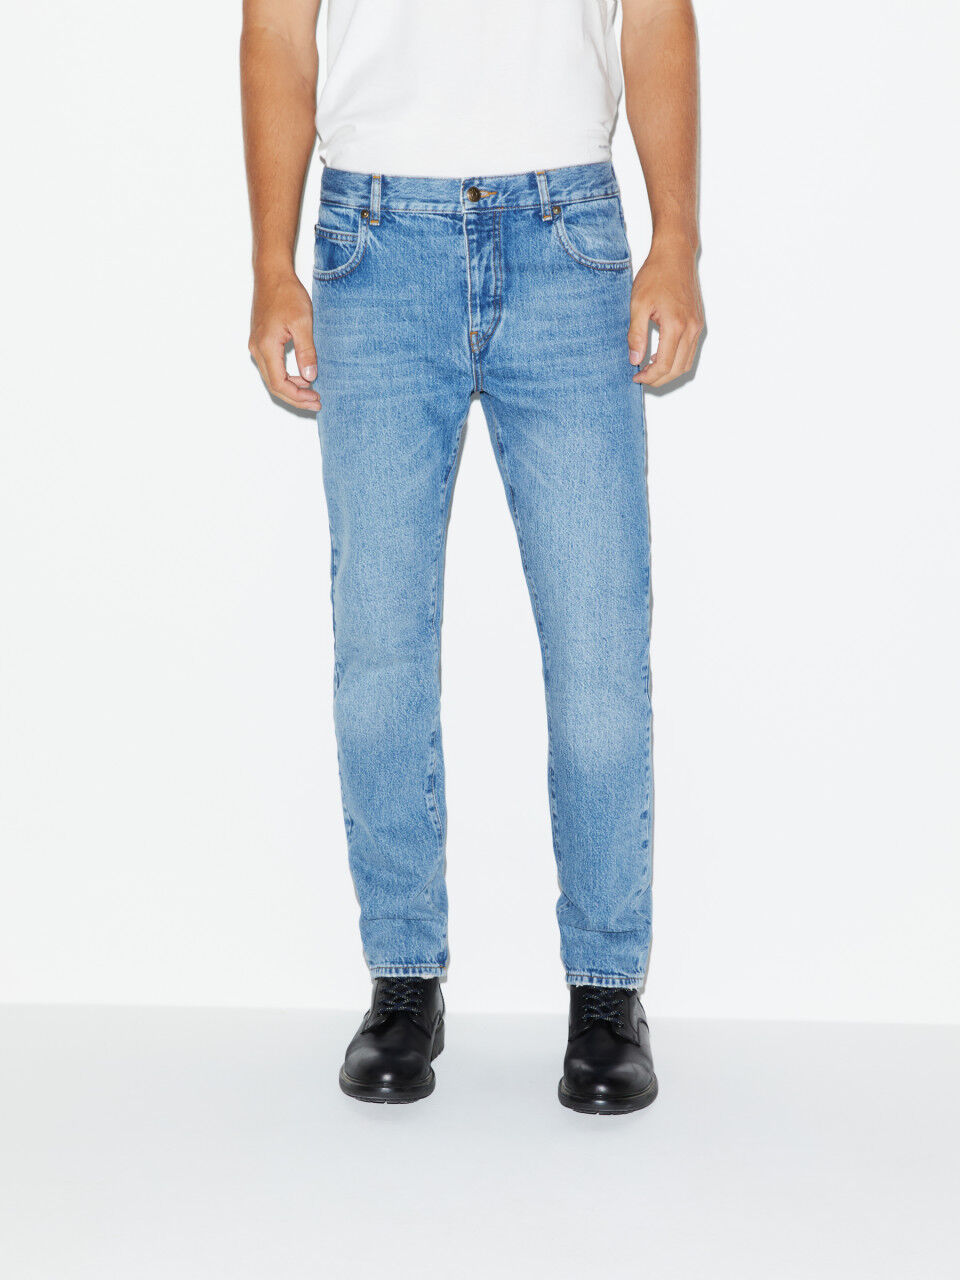 Men's Jeans: Ripped, Skinny and Tapered | Sisley UK